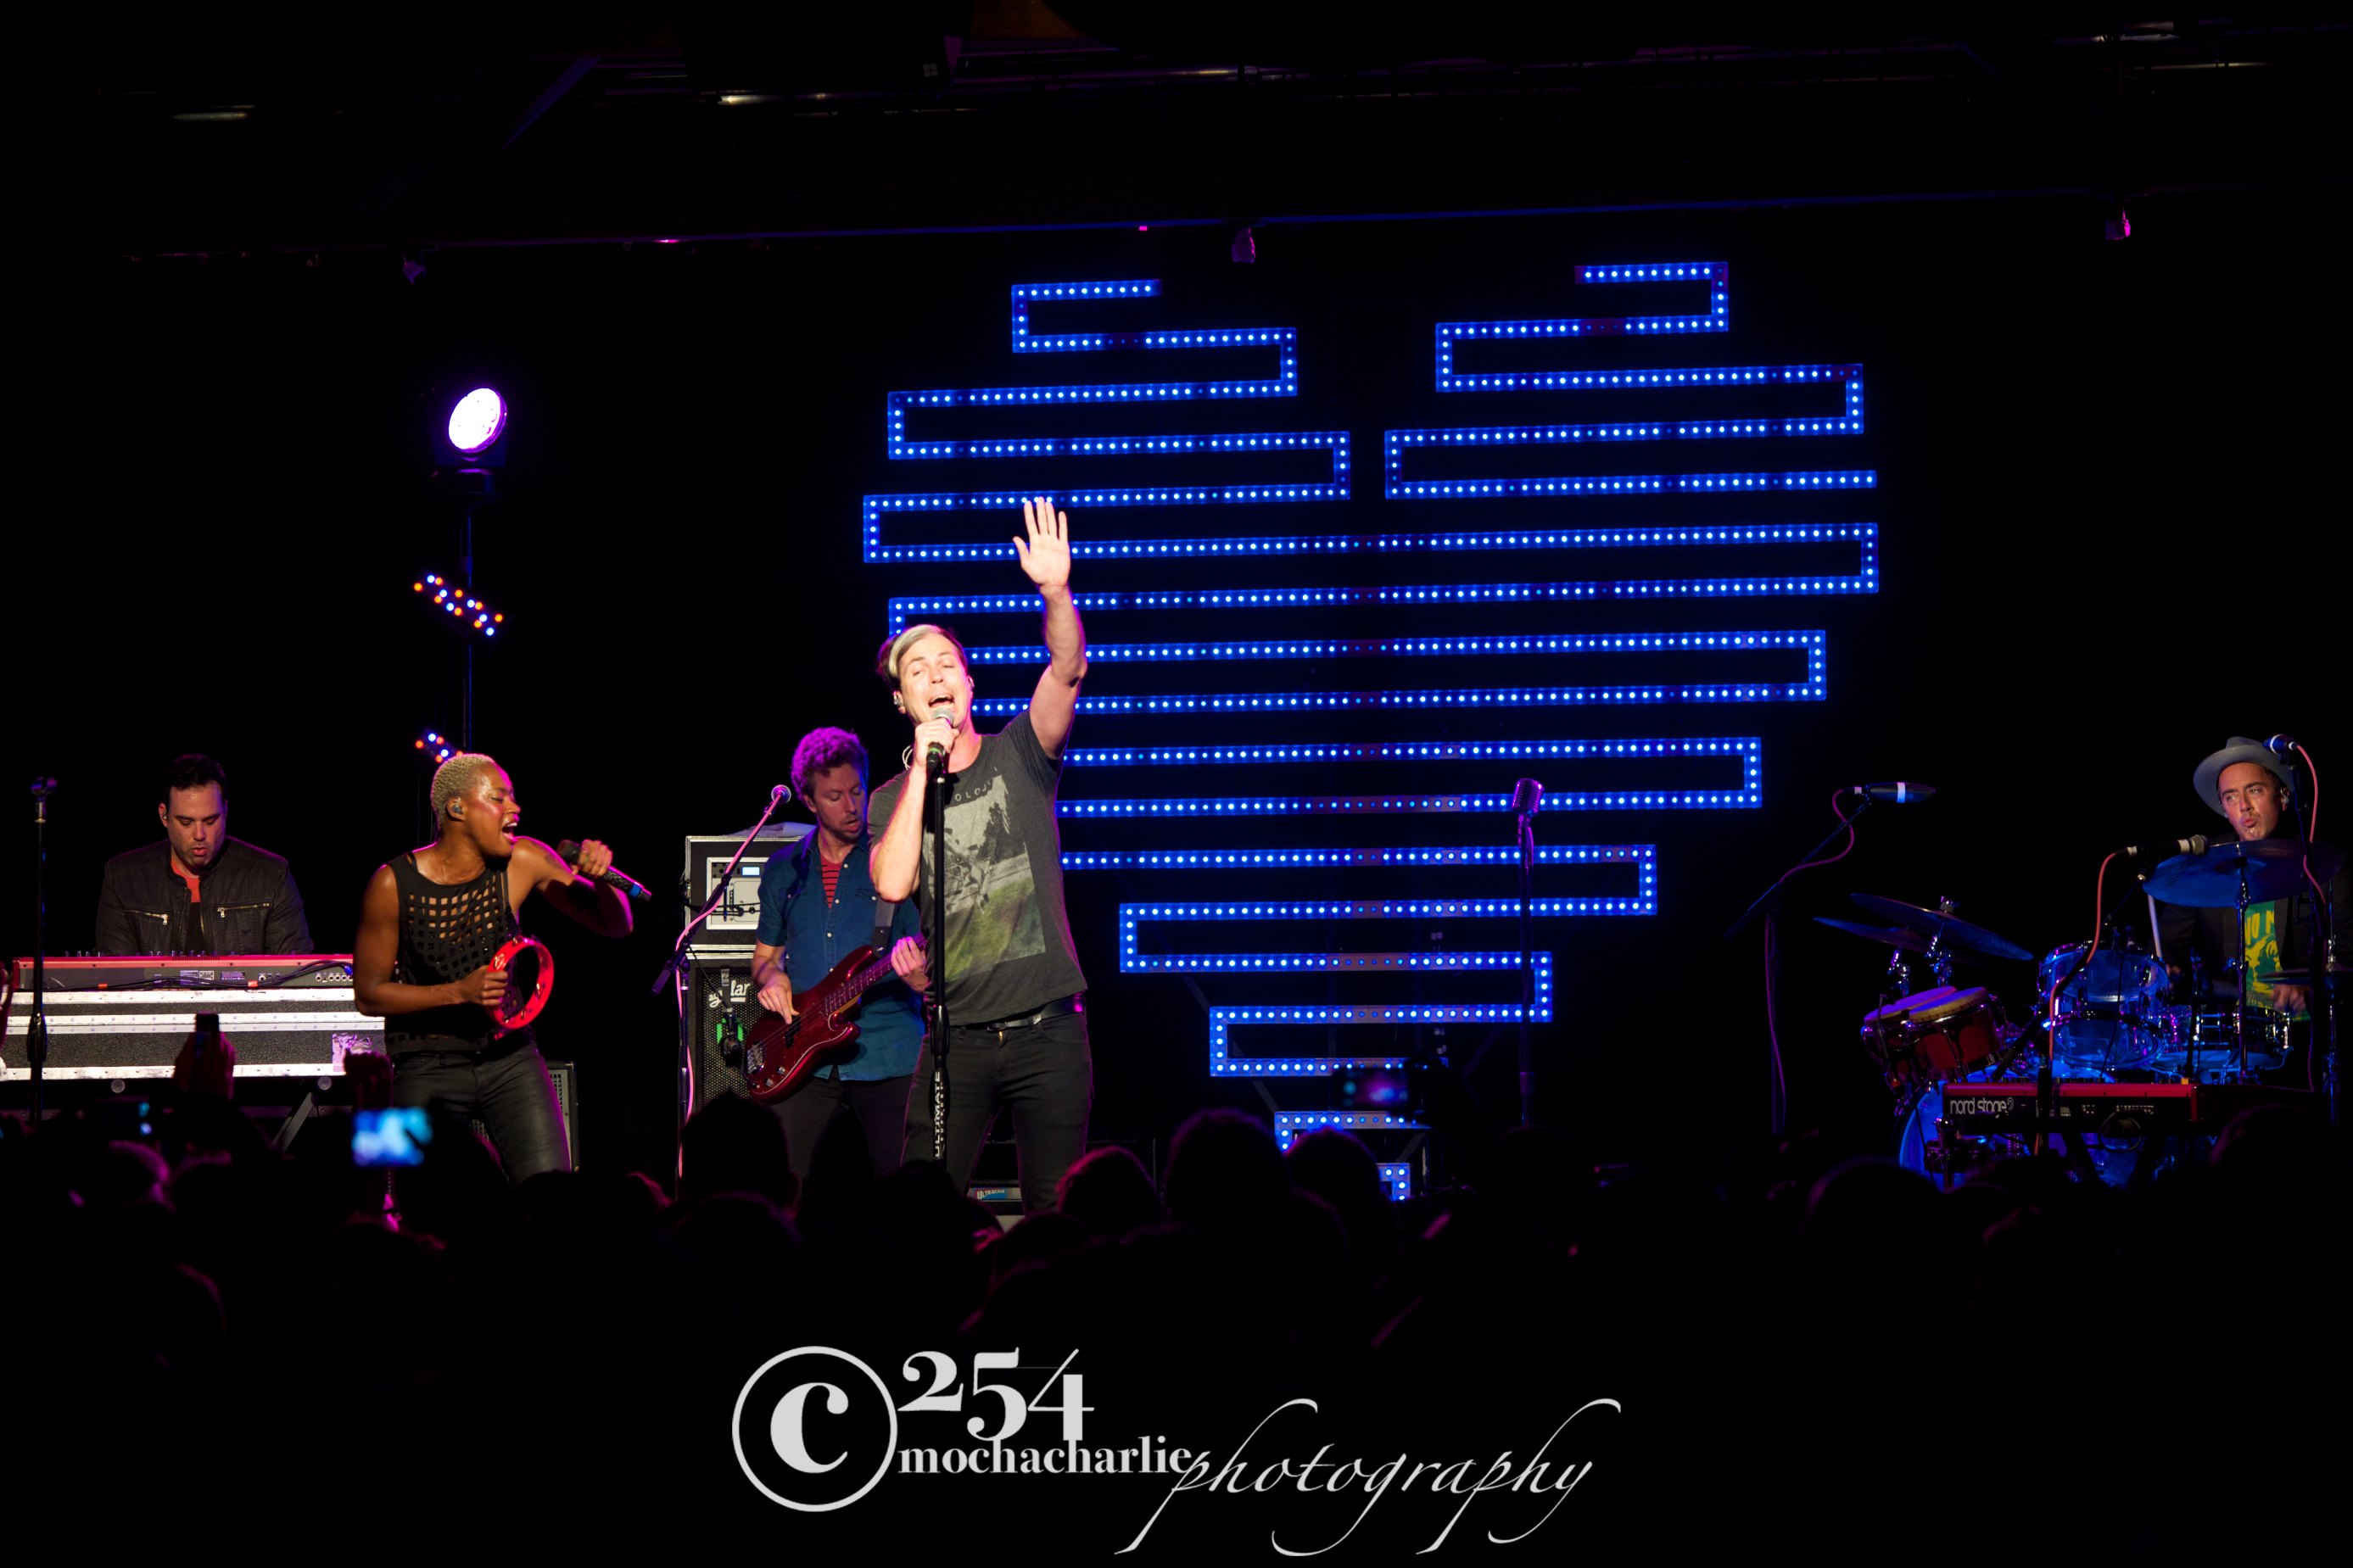 Fitz and The Tantrums Live @ Showbox SODO – 8/9/13 (Photo by Mocha Charlie)